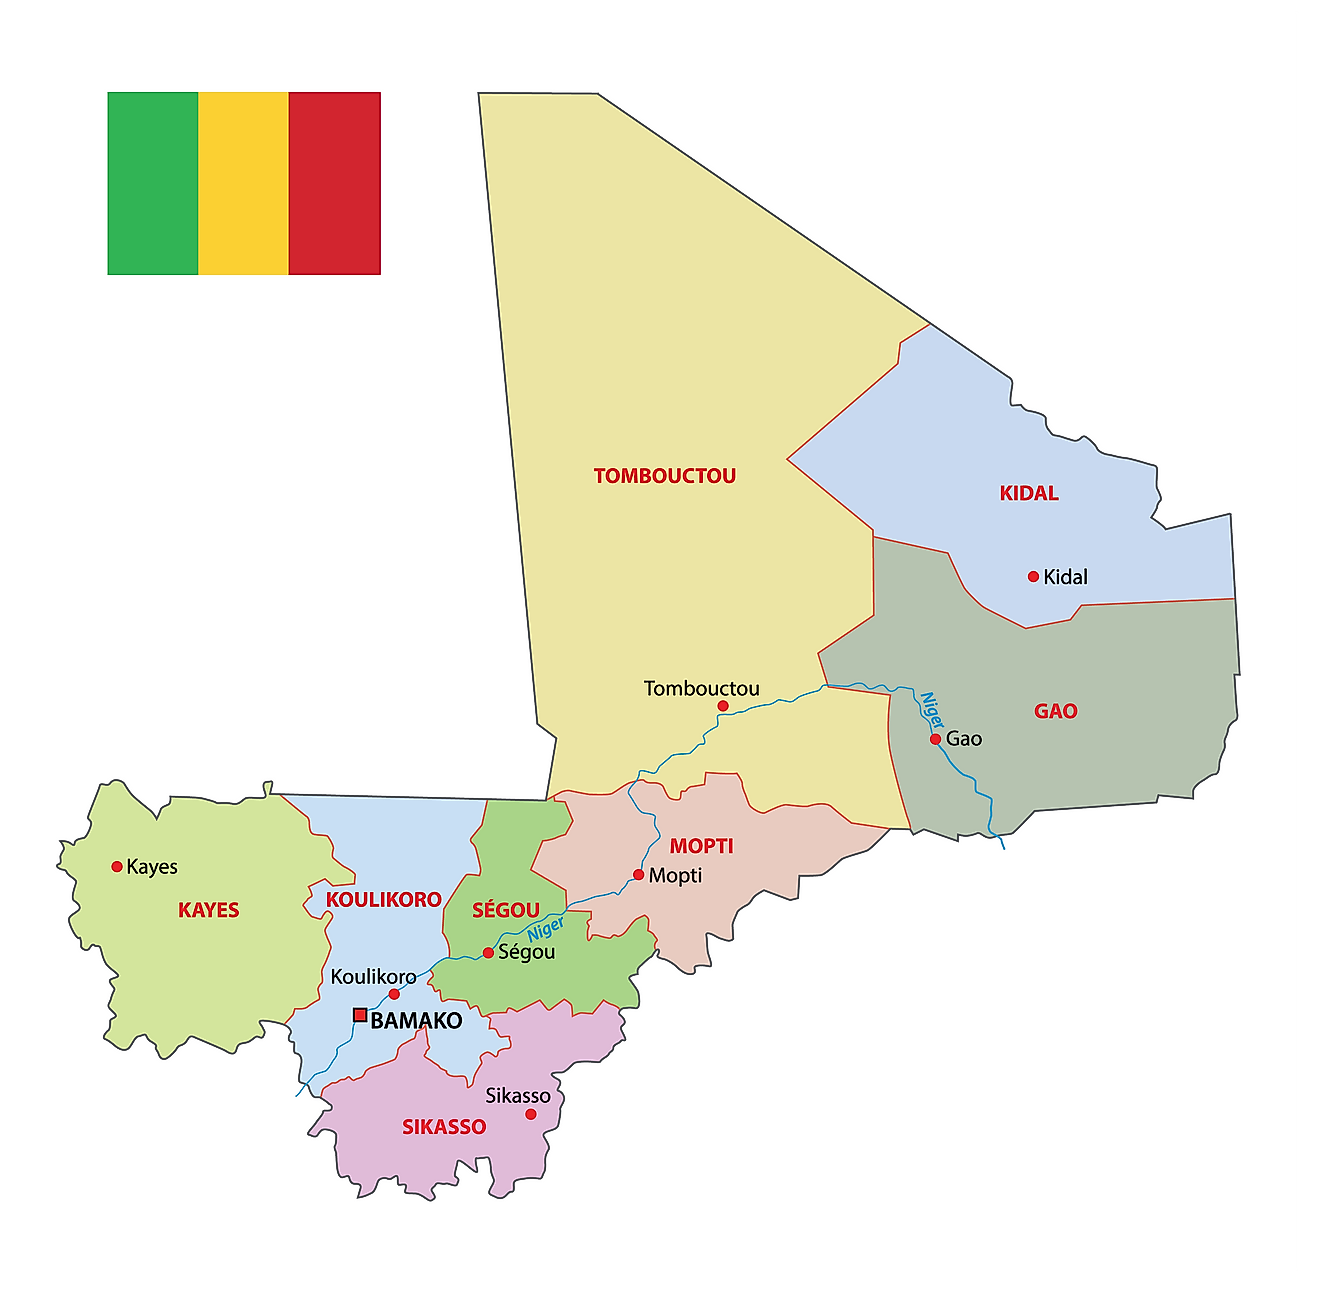 Political map of Mali showing the ten regions, its capital, and the national capital, Bamako.